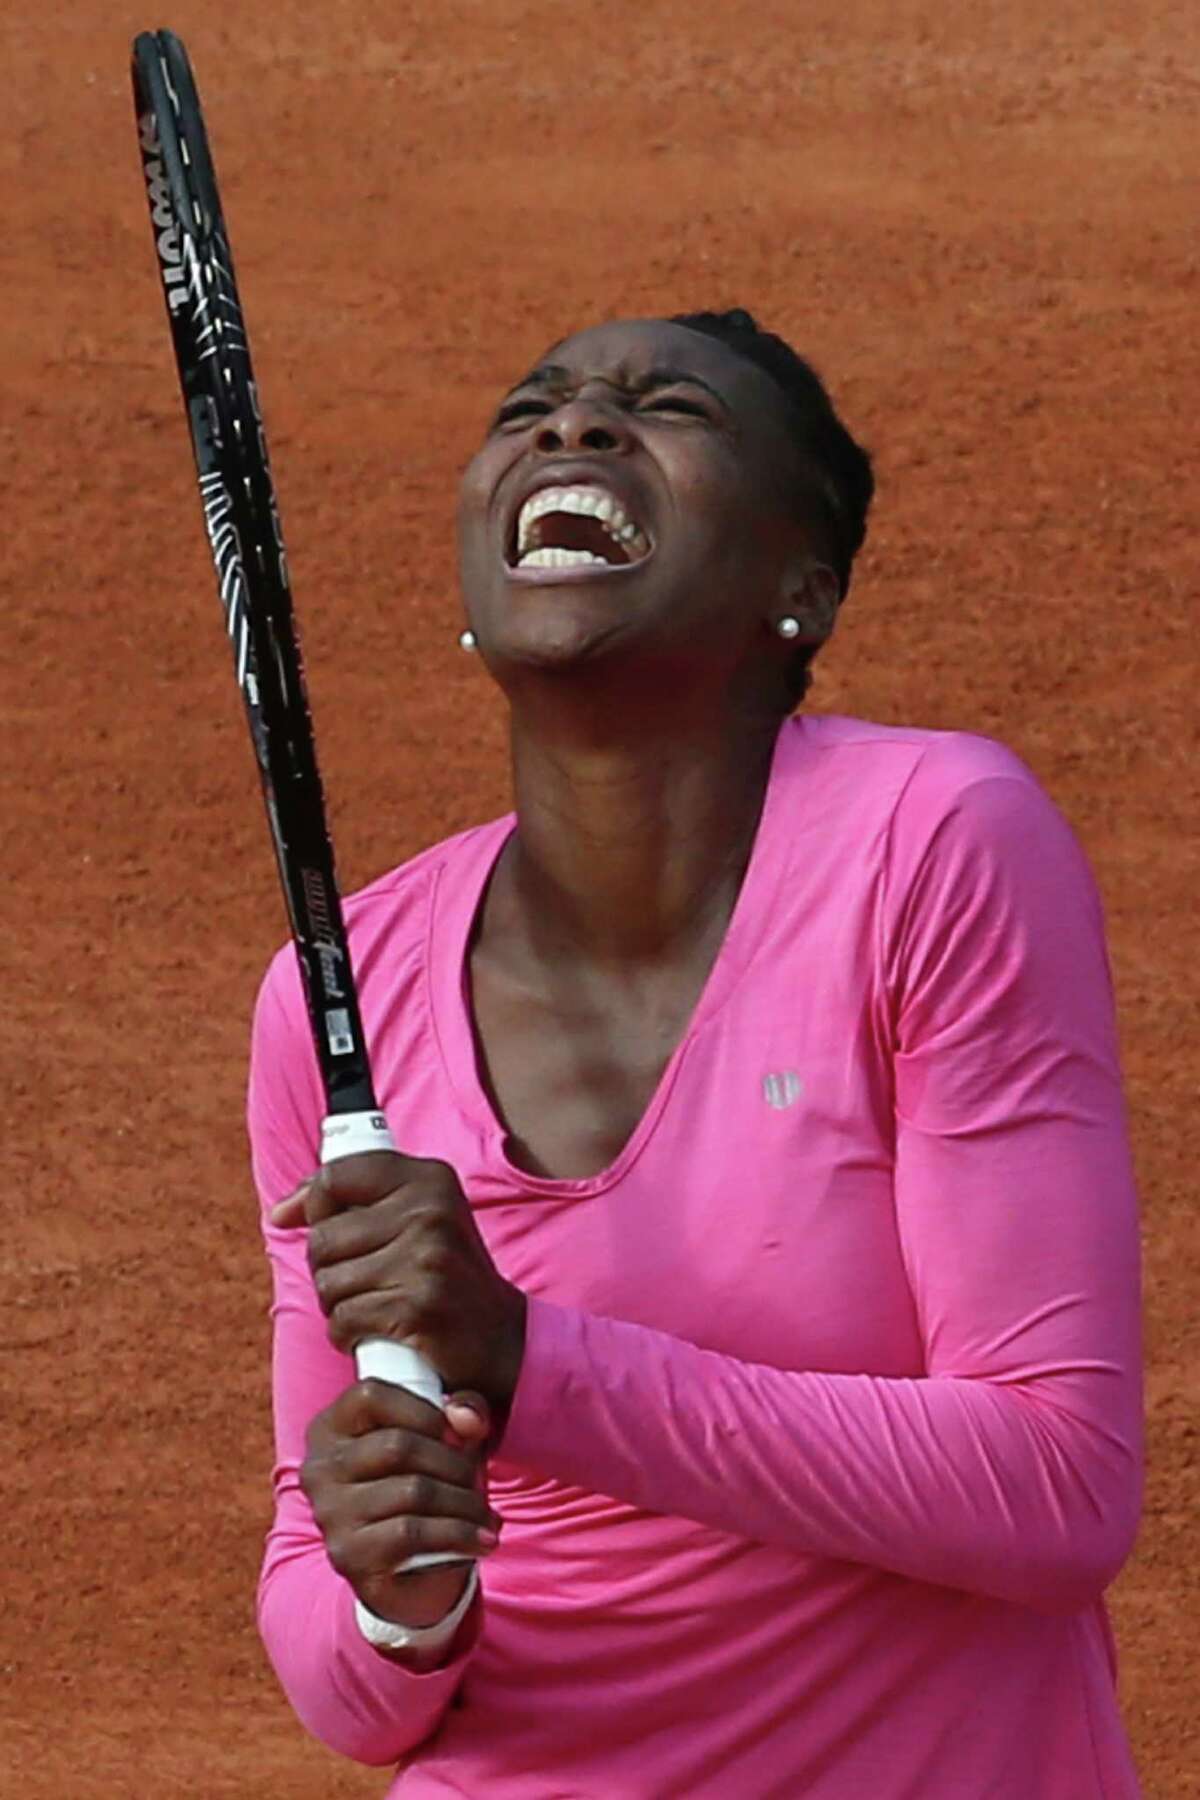 Venus Williams of the U.S. screams after missing a return a return against Poland's Urszula Radwanska in their first round match of the French Open tennis tournament, at Roland Garros stadium in Paris, Sunday, May 26, 2013. (AP Photo/Michel Euler)